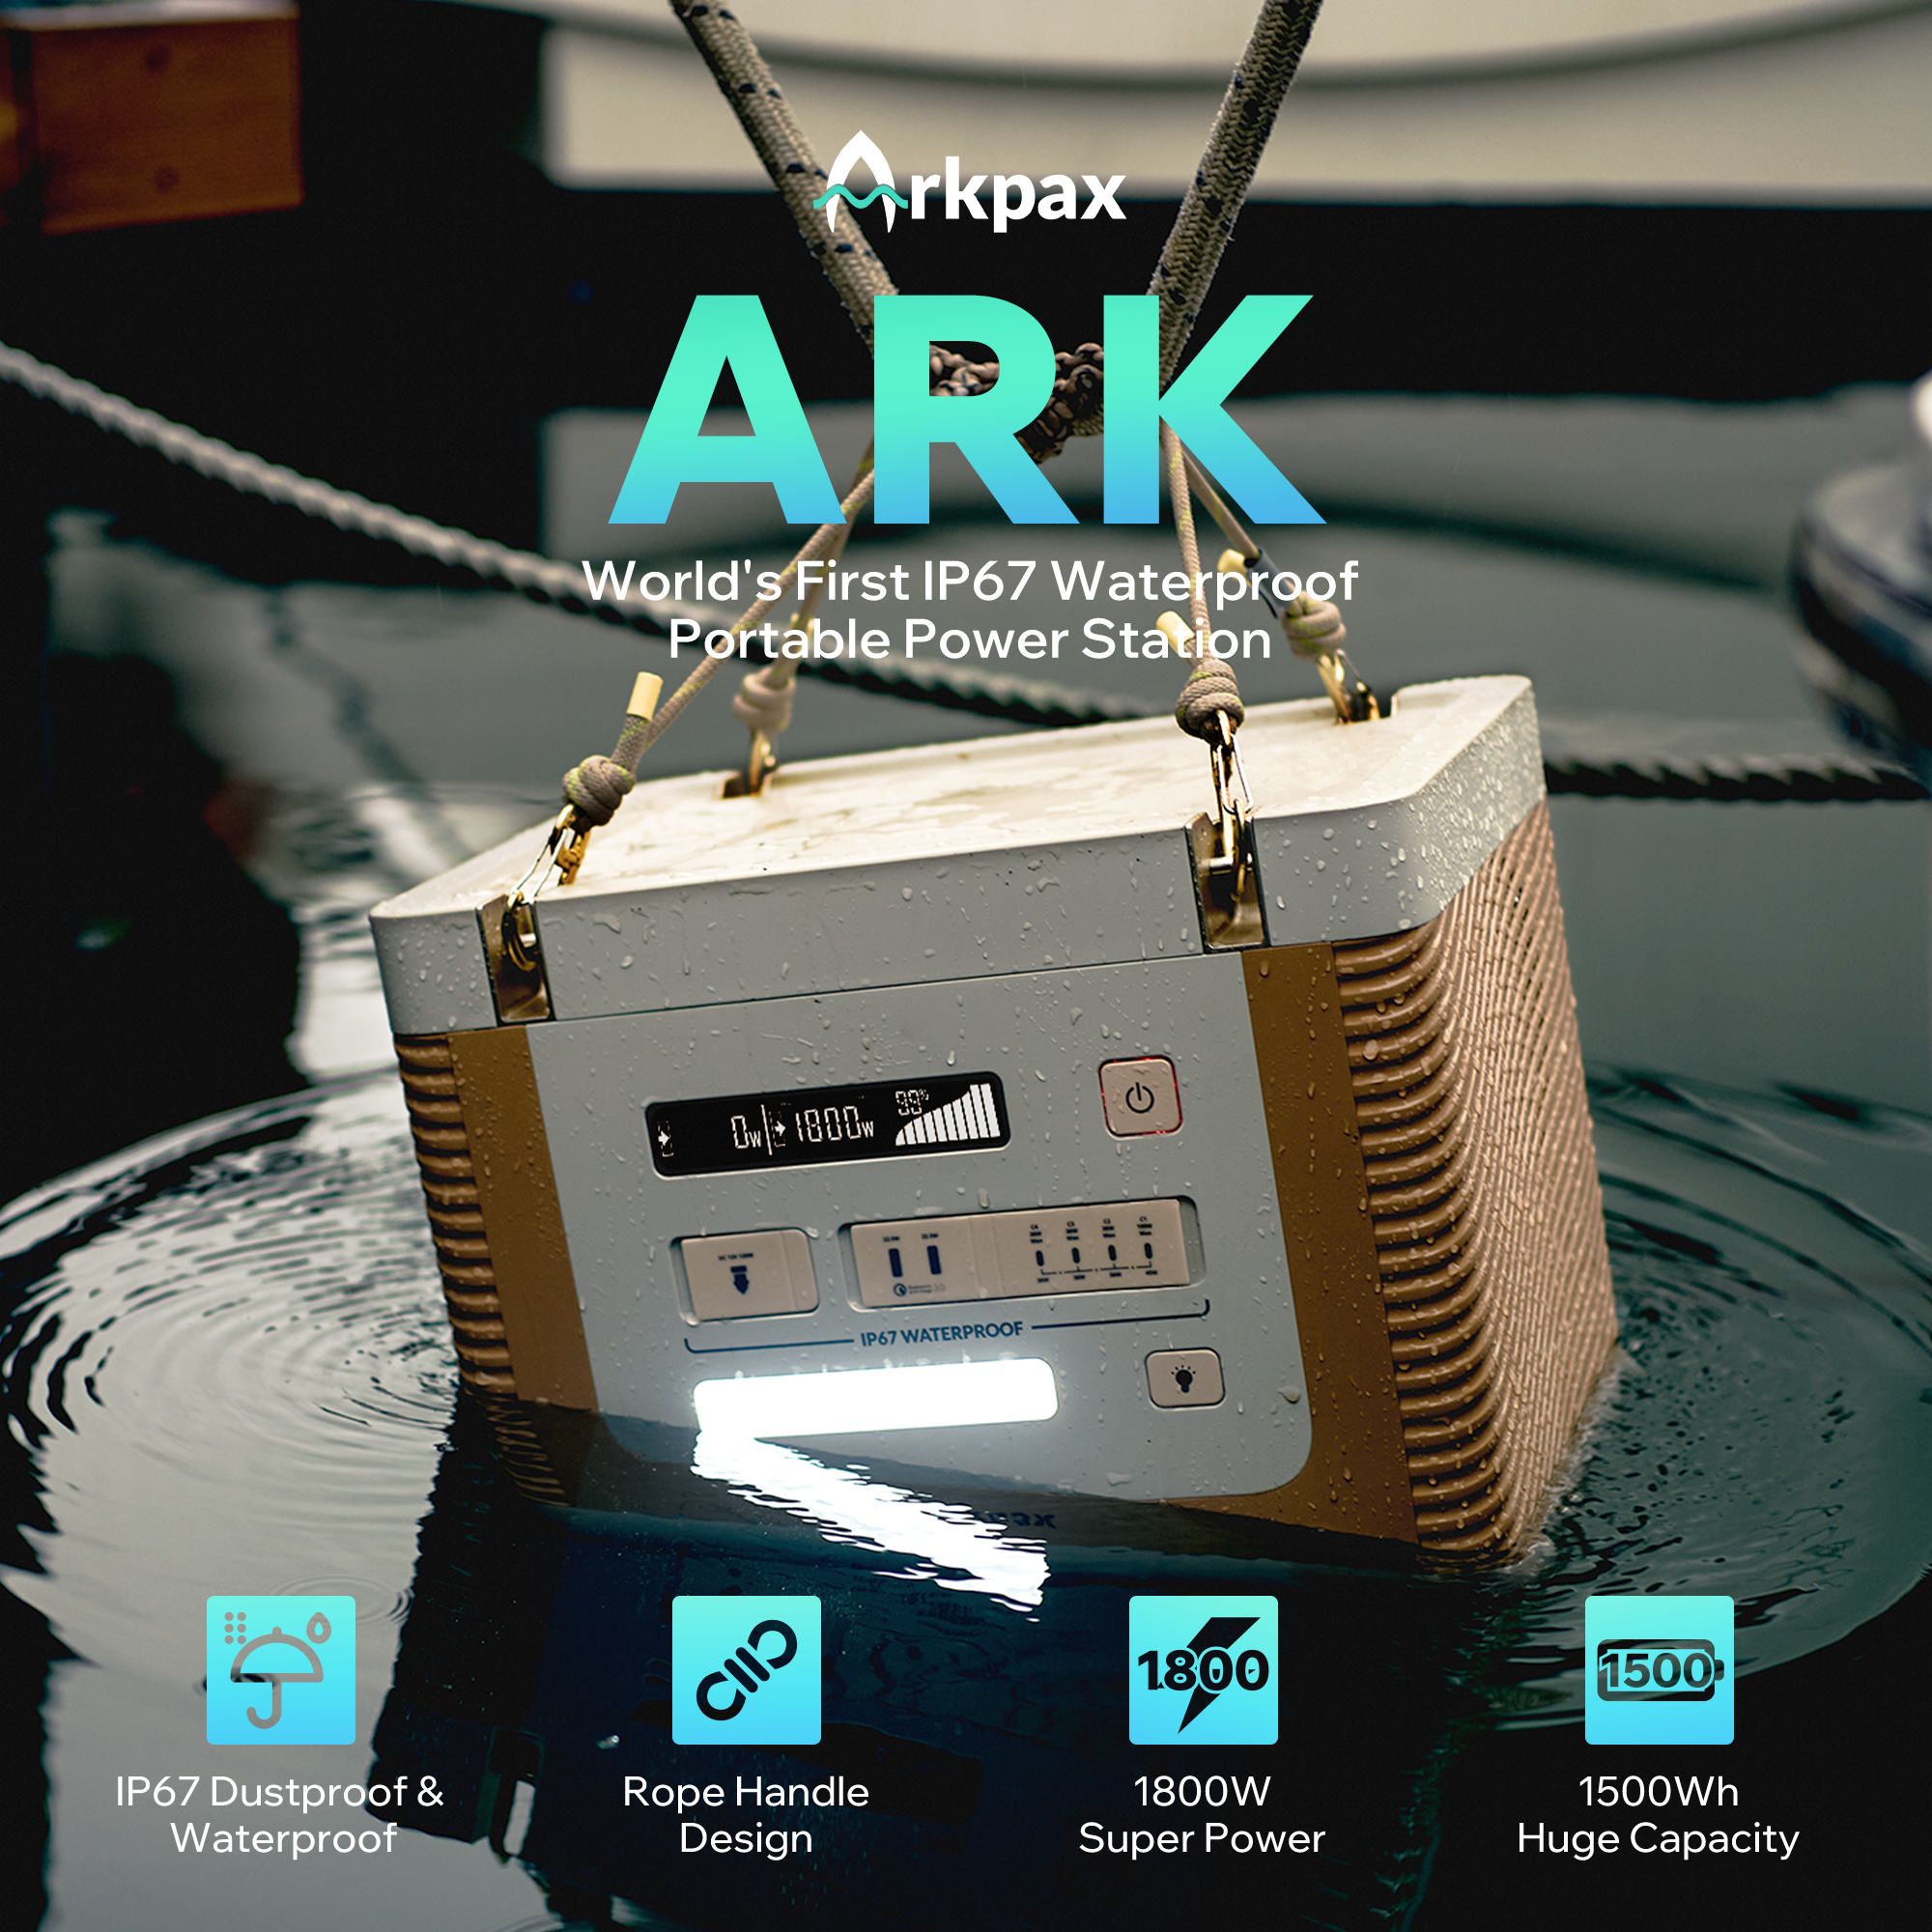 Arkpax Ark 1800W: Setting a New Standard for Portable Power Stations in Aquatic Exploration